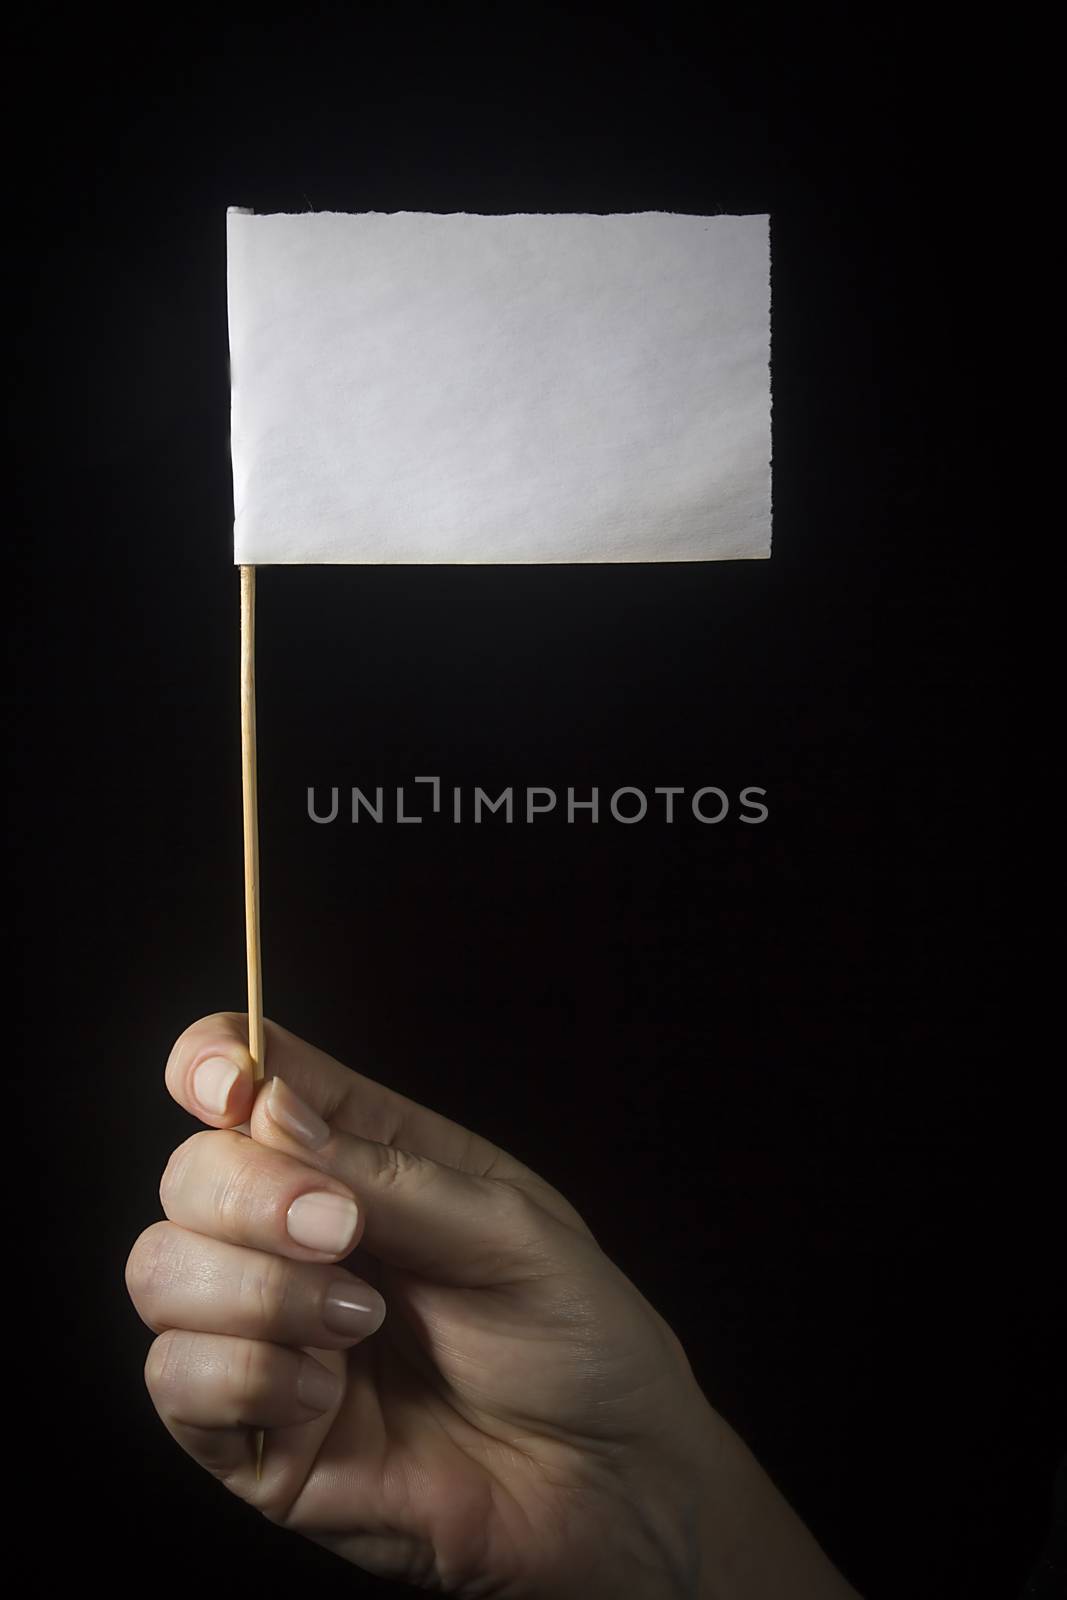 Female hand with a white flag on a black background